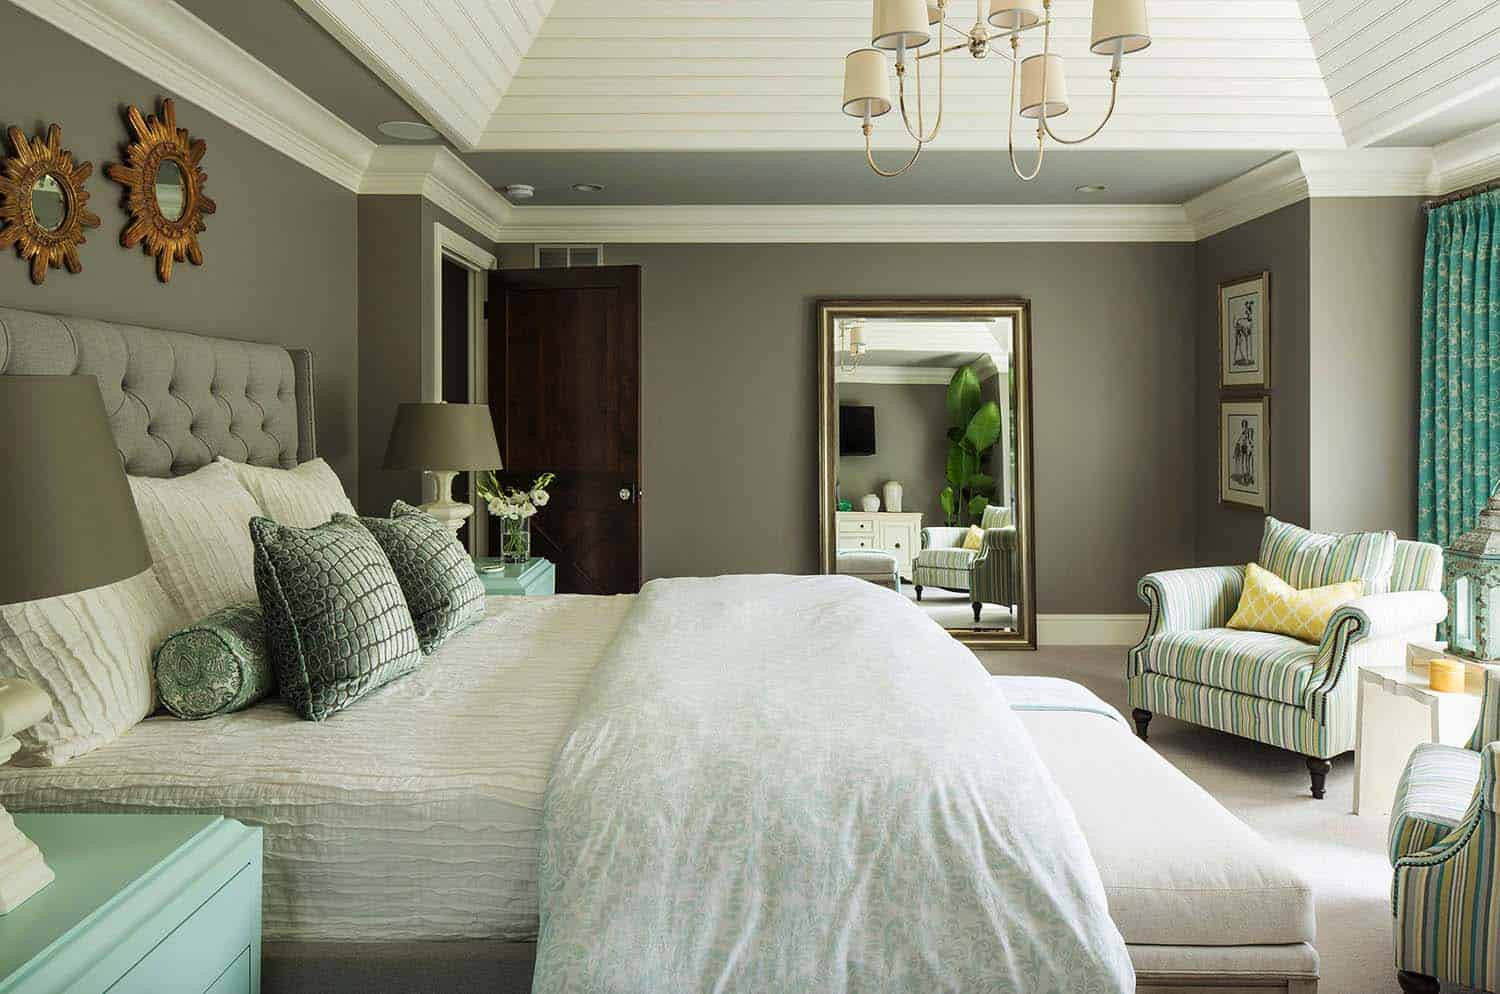 Best Bedroom Wall Colors
 25 Absolutely stunning master bedroom color scheme ideas